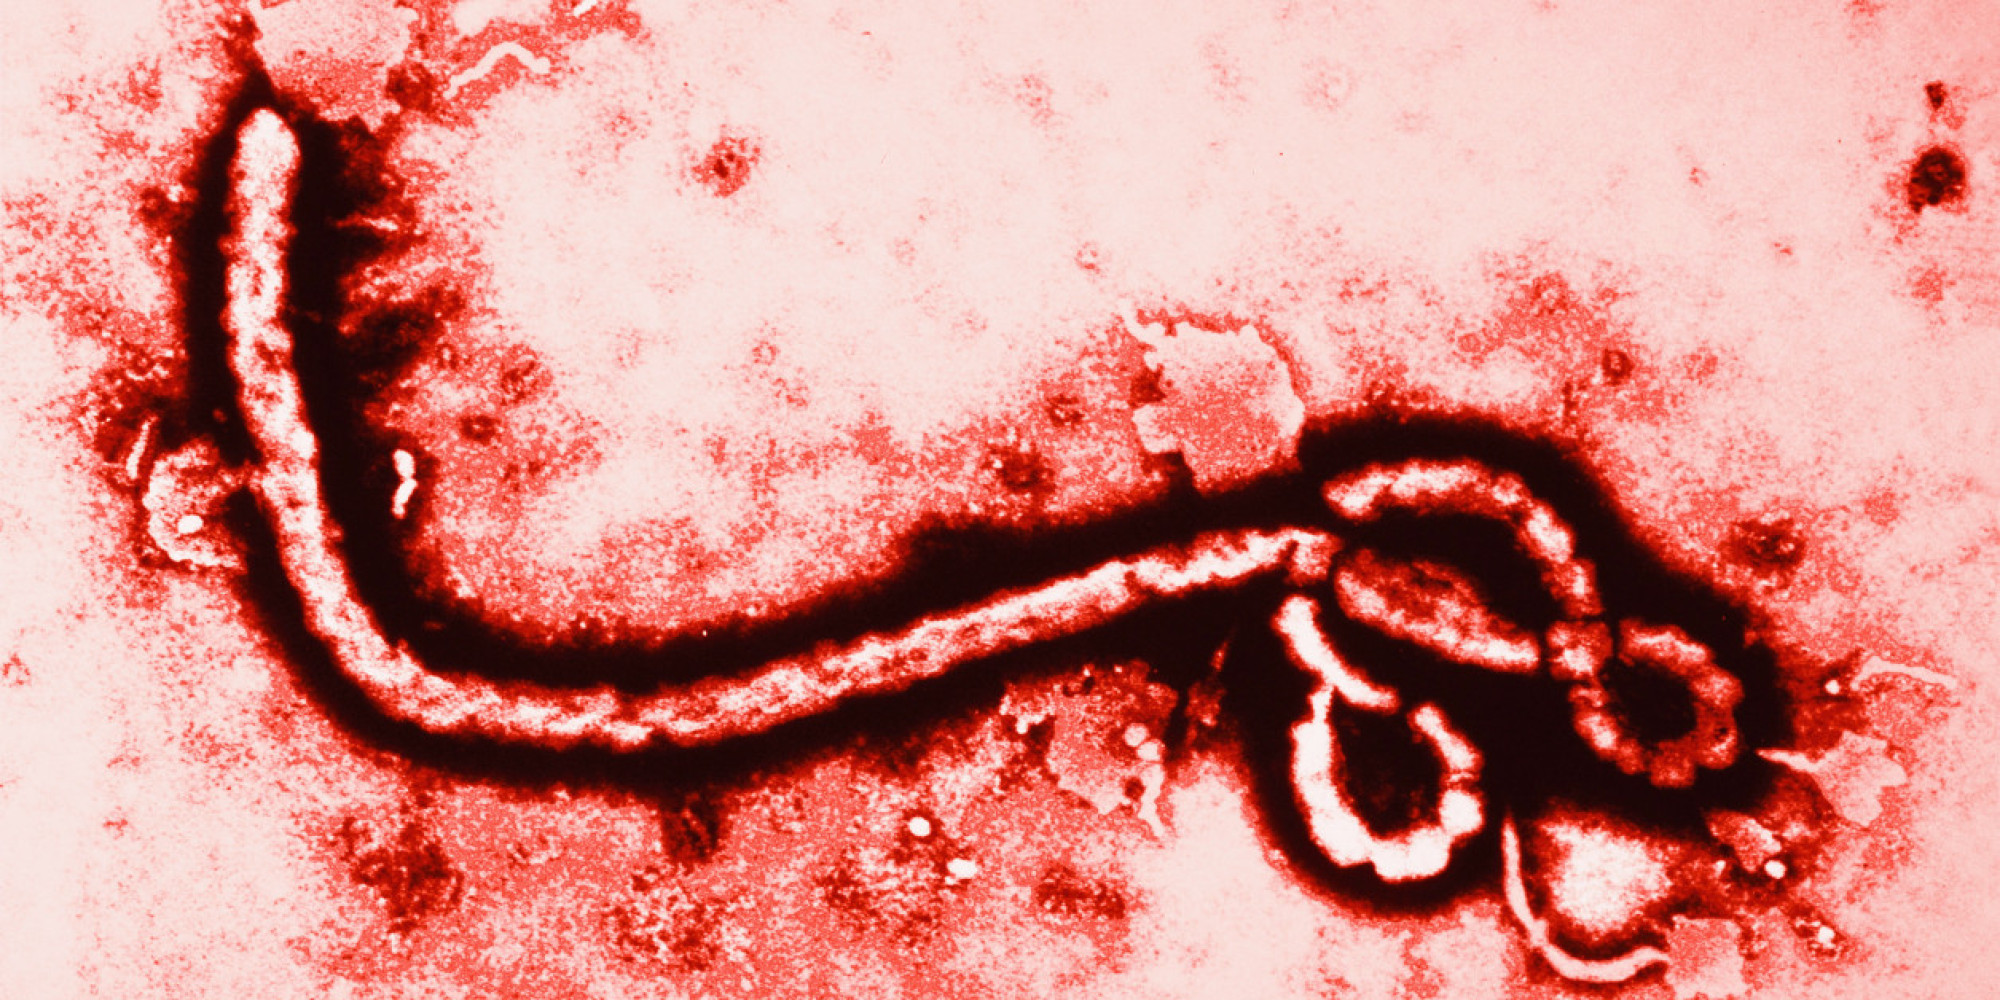 Recognizing Ebola Symptoms Is Crucial